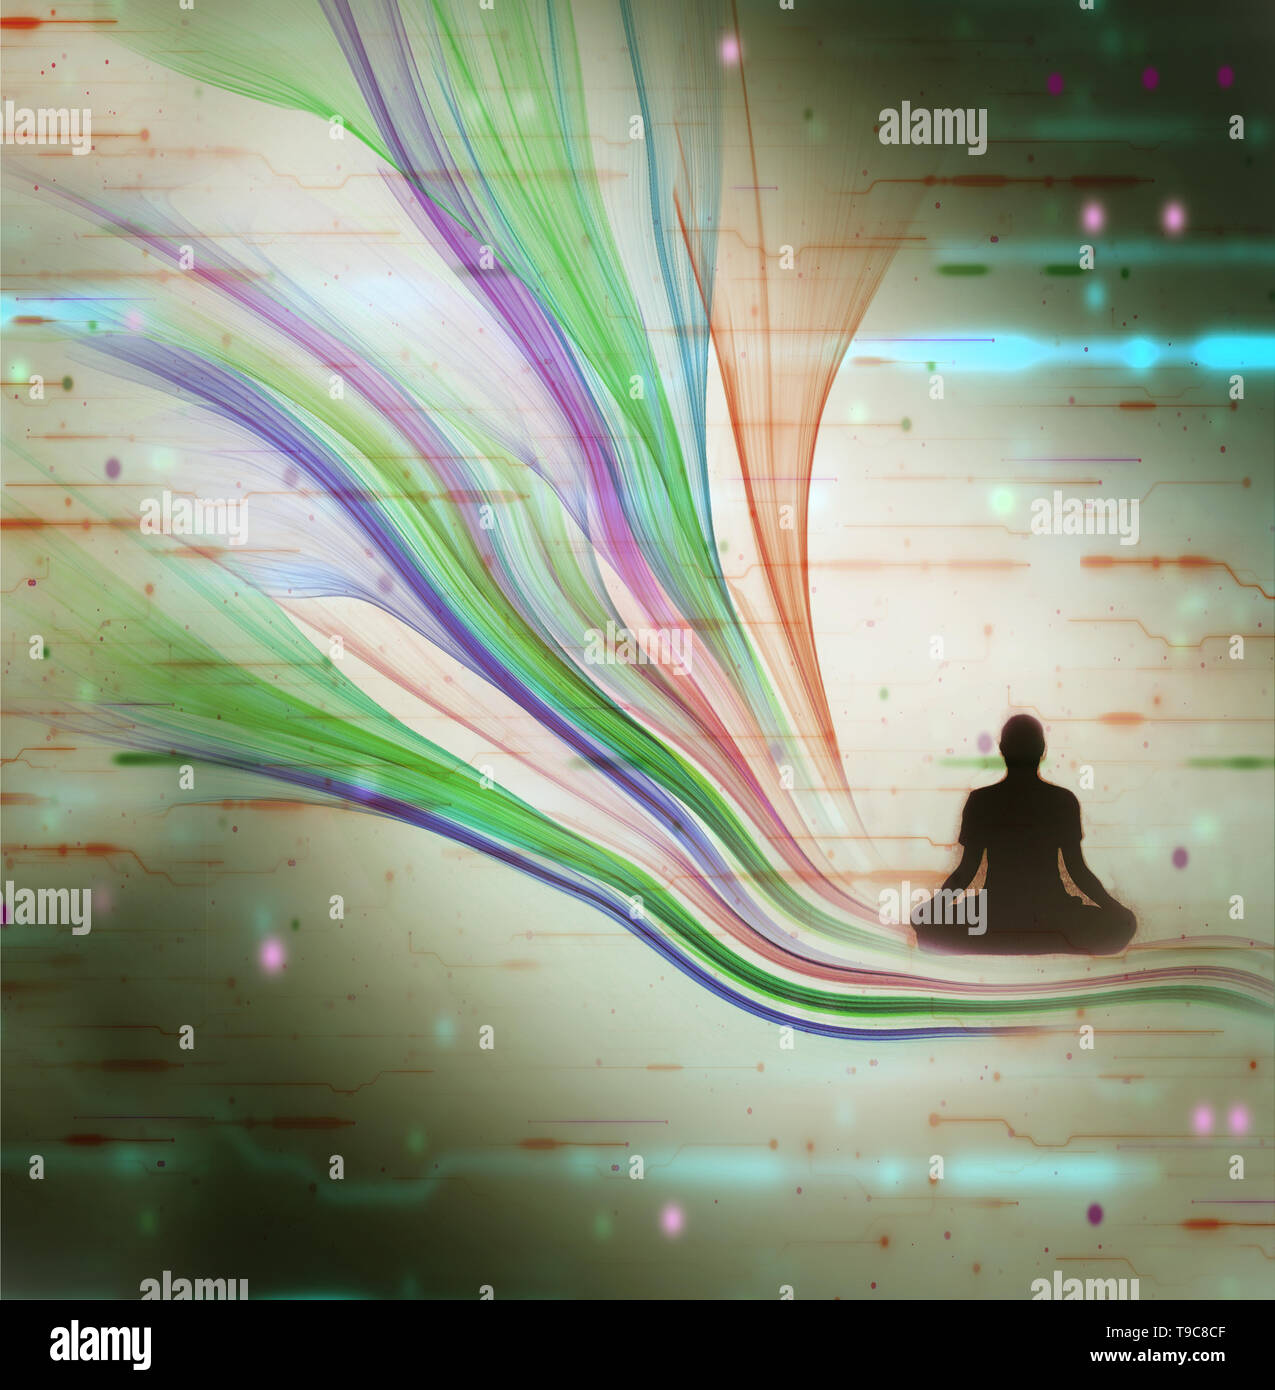 man in meditation on swirly lines against a background of electronic noise Stock Photo